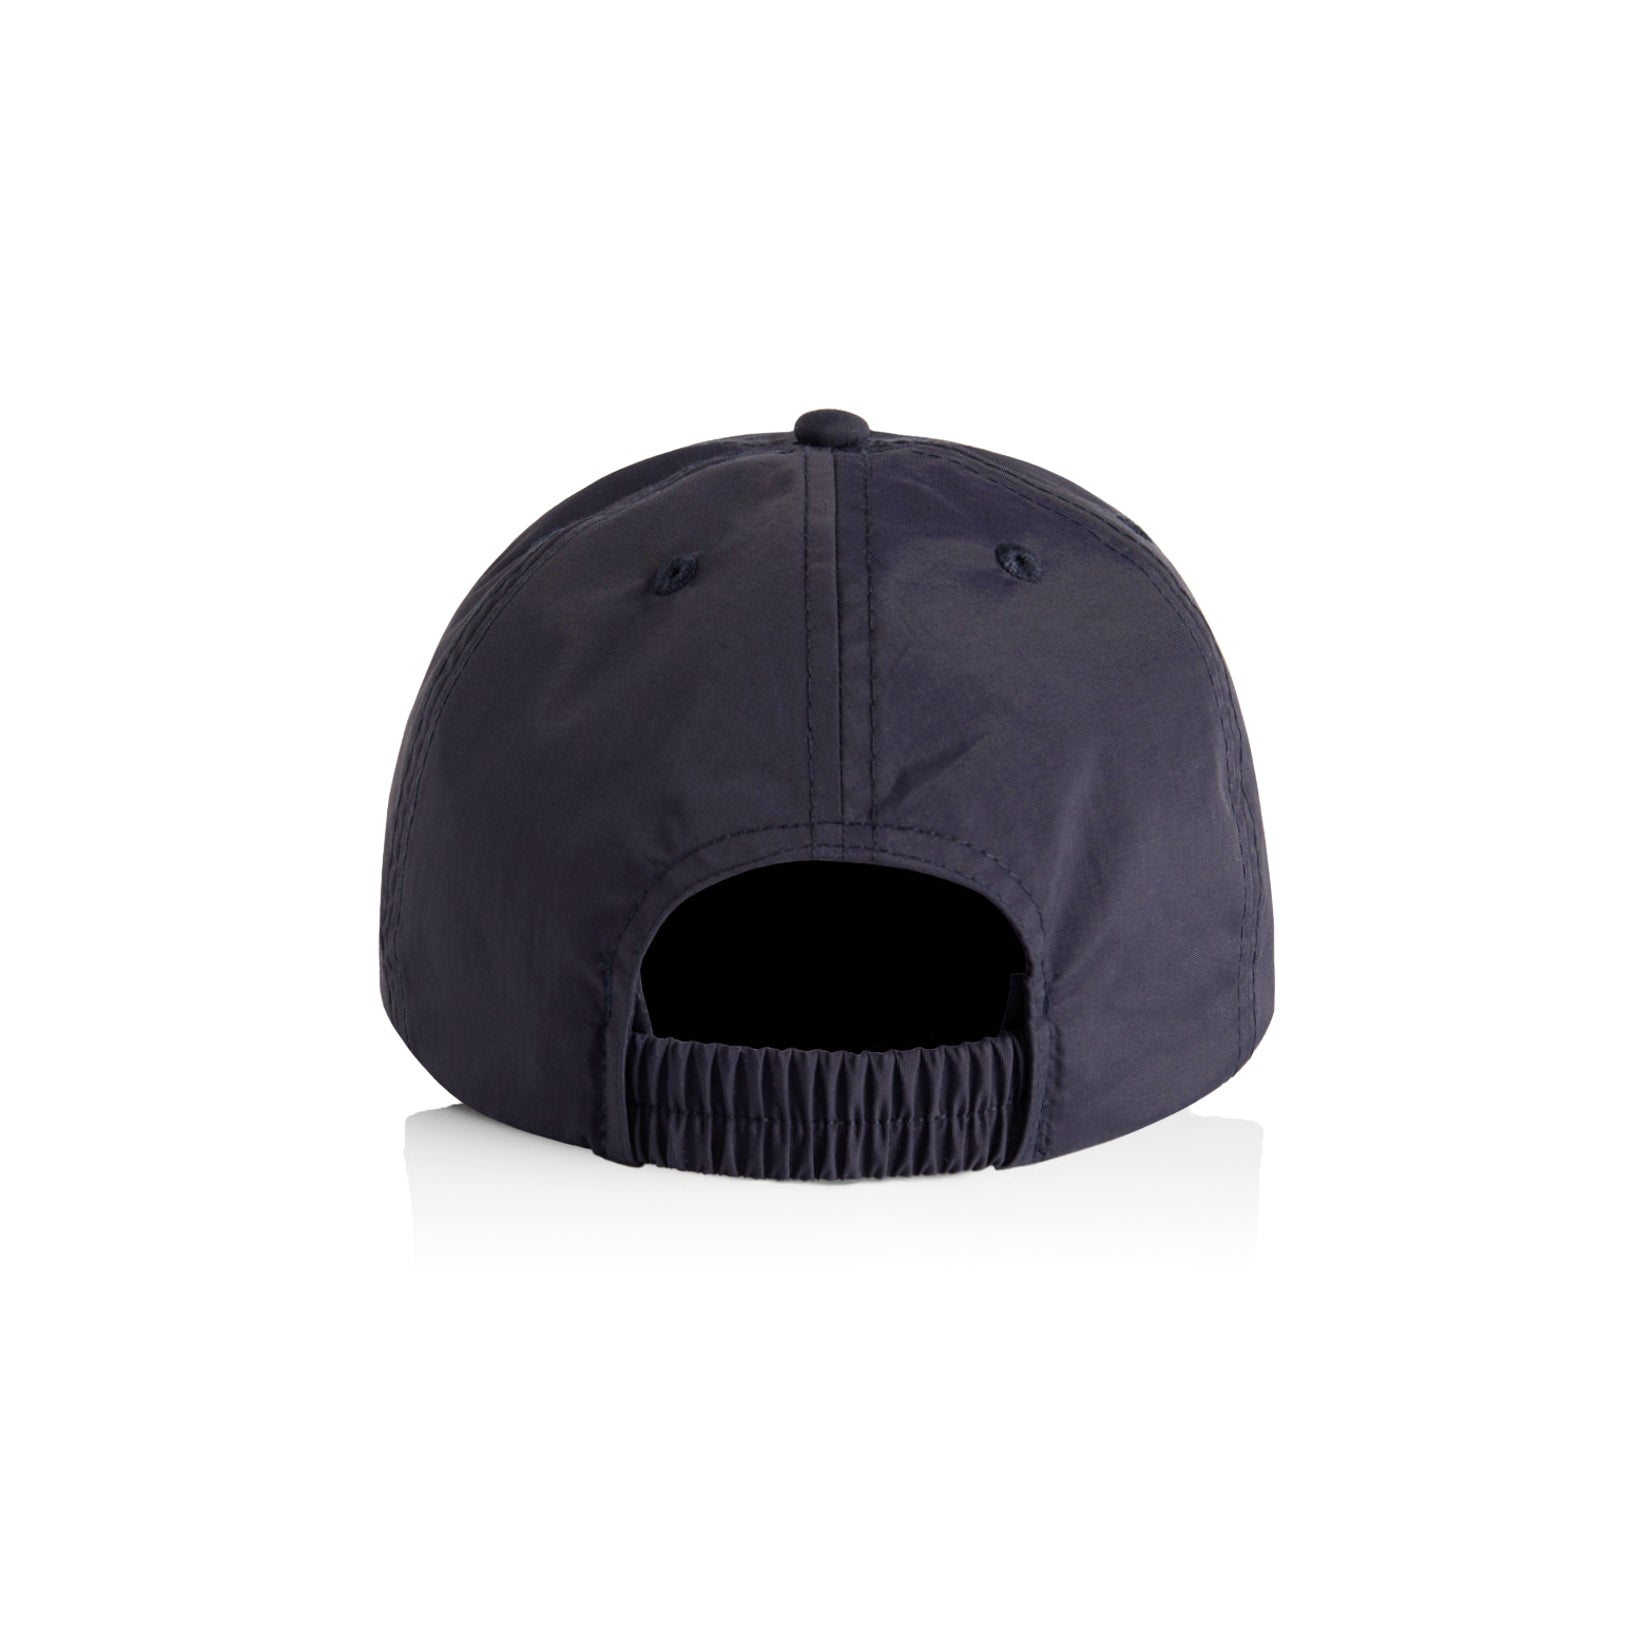 Introducing our new Kids Nylon Cap, perfect for active youngsters. Made from 100% quick-dry recycled nylon, this lightweight cap features an embroidered logo, soft foam peak, and a stretch strapback for a secure fit. The one-size-fits-all design ensures comfort and durability, ideal for everyday adventures.